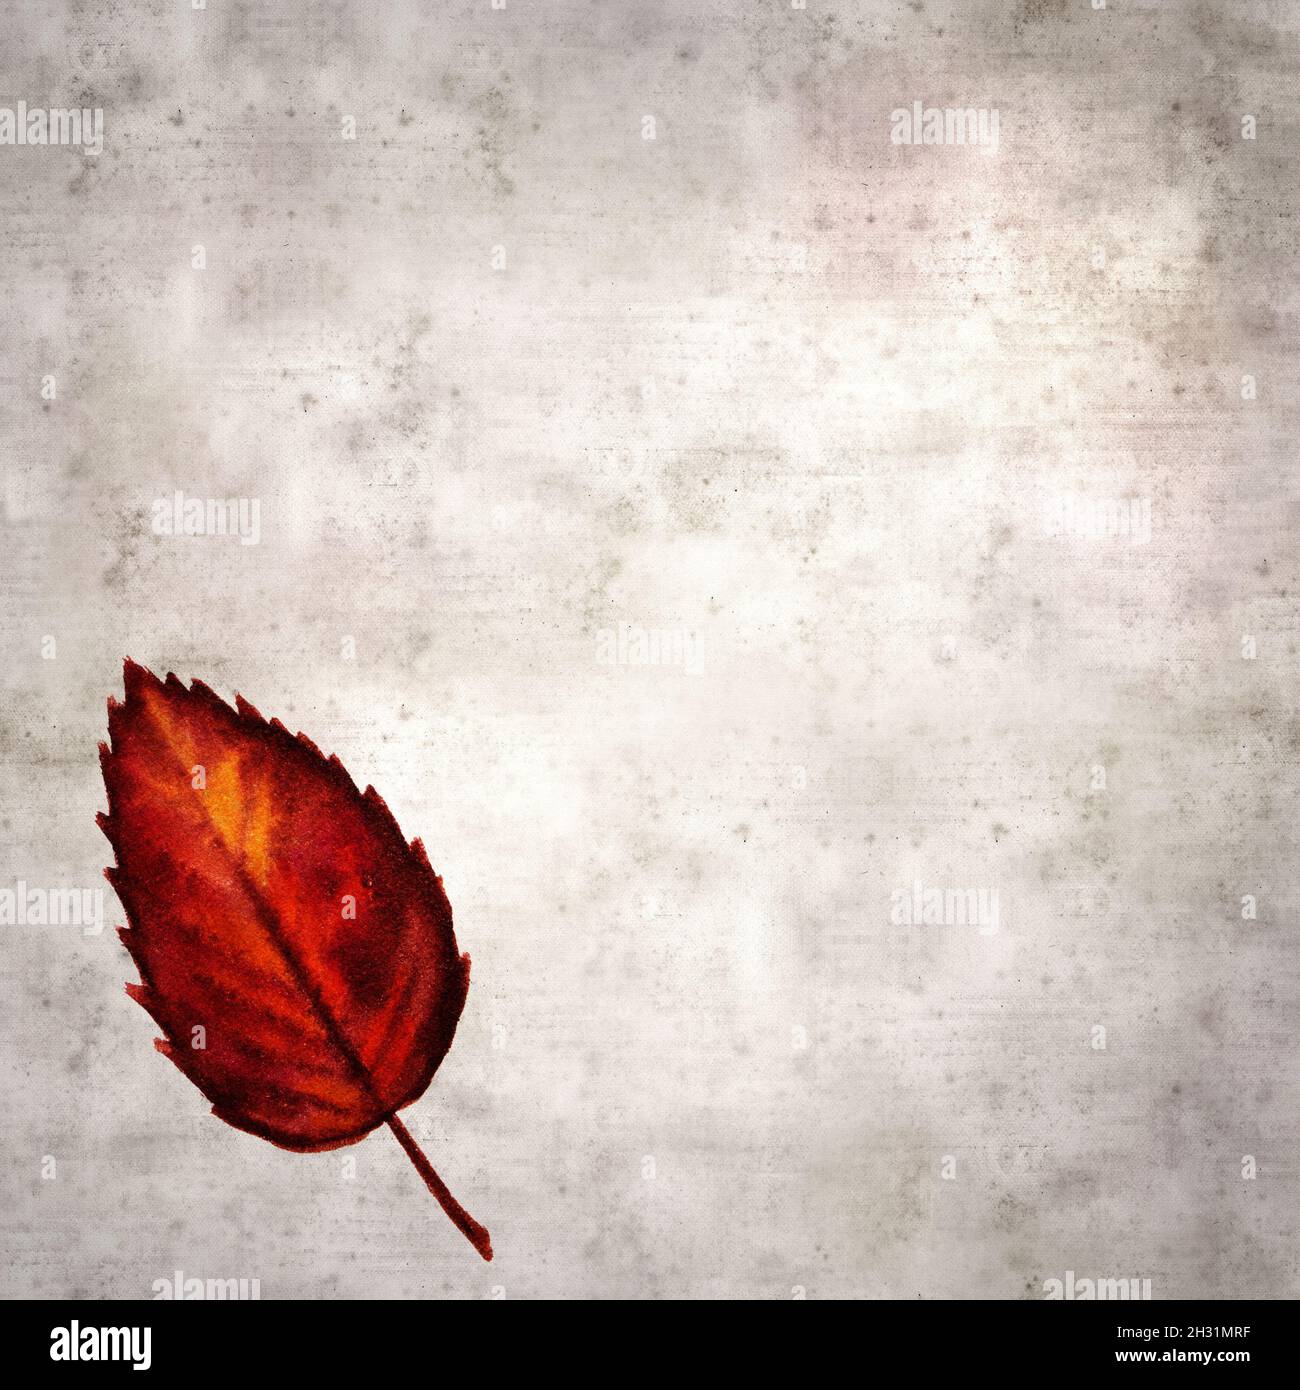 stylish textured old paper background with autumnal leaves in ...